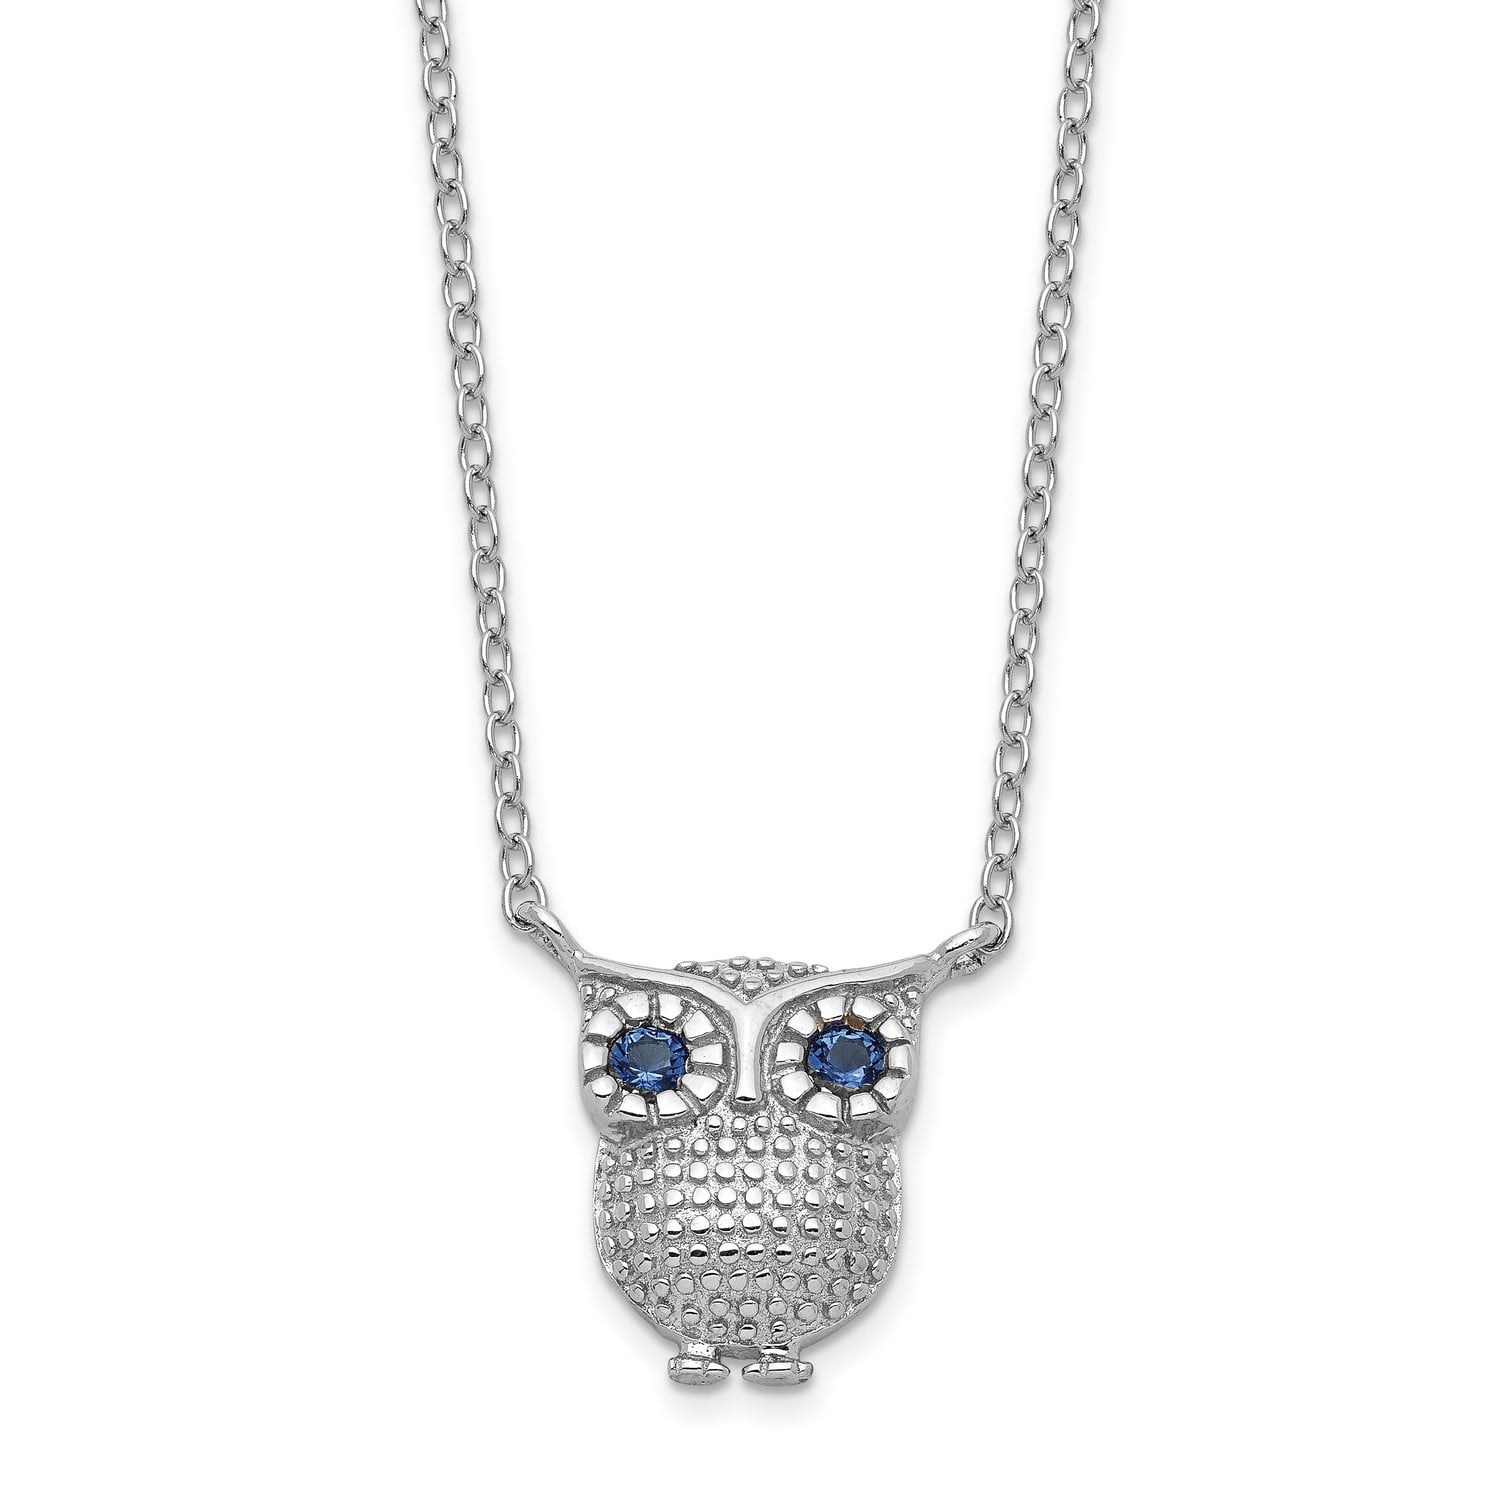 Owl Pendant and Necklace with Blue Synthetic Sapphire CZ Eyes in 925  Sterling Silver 15 mm x 15 mm